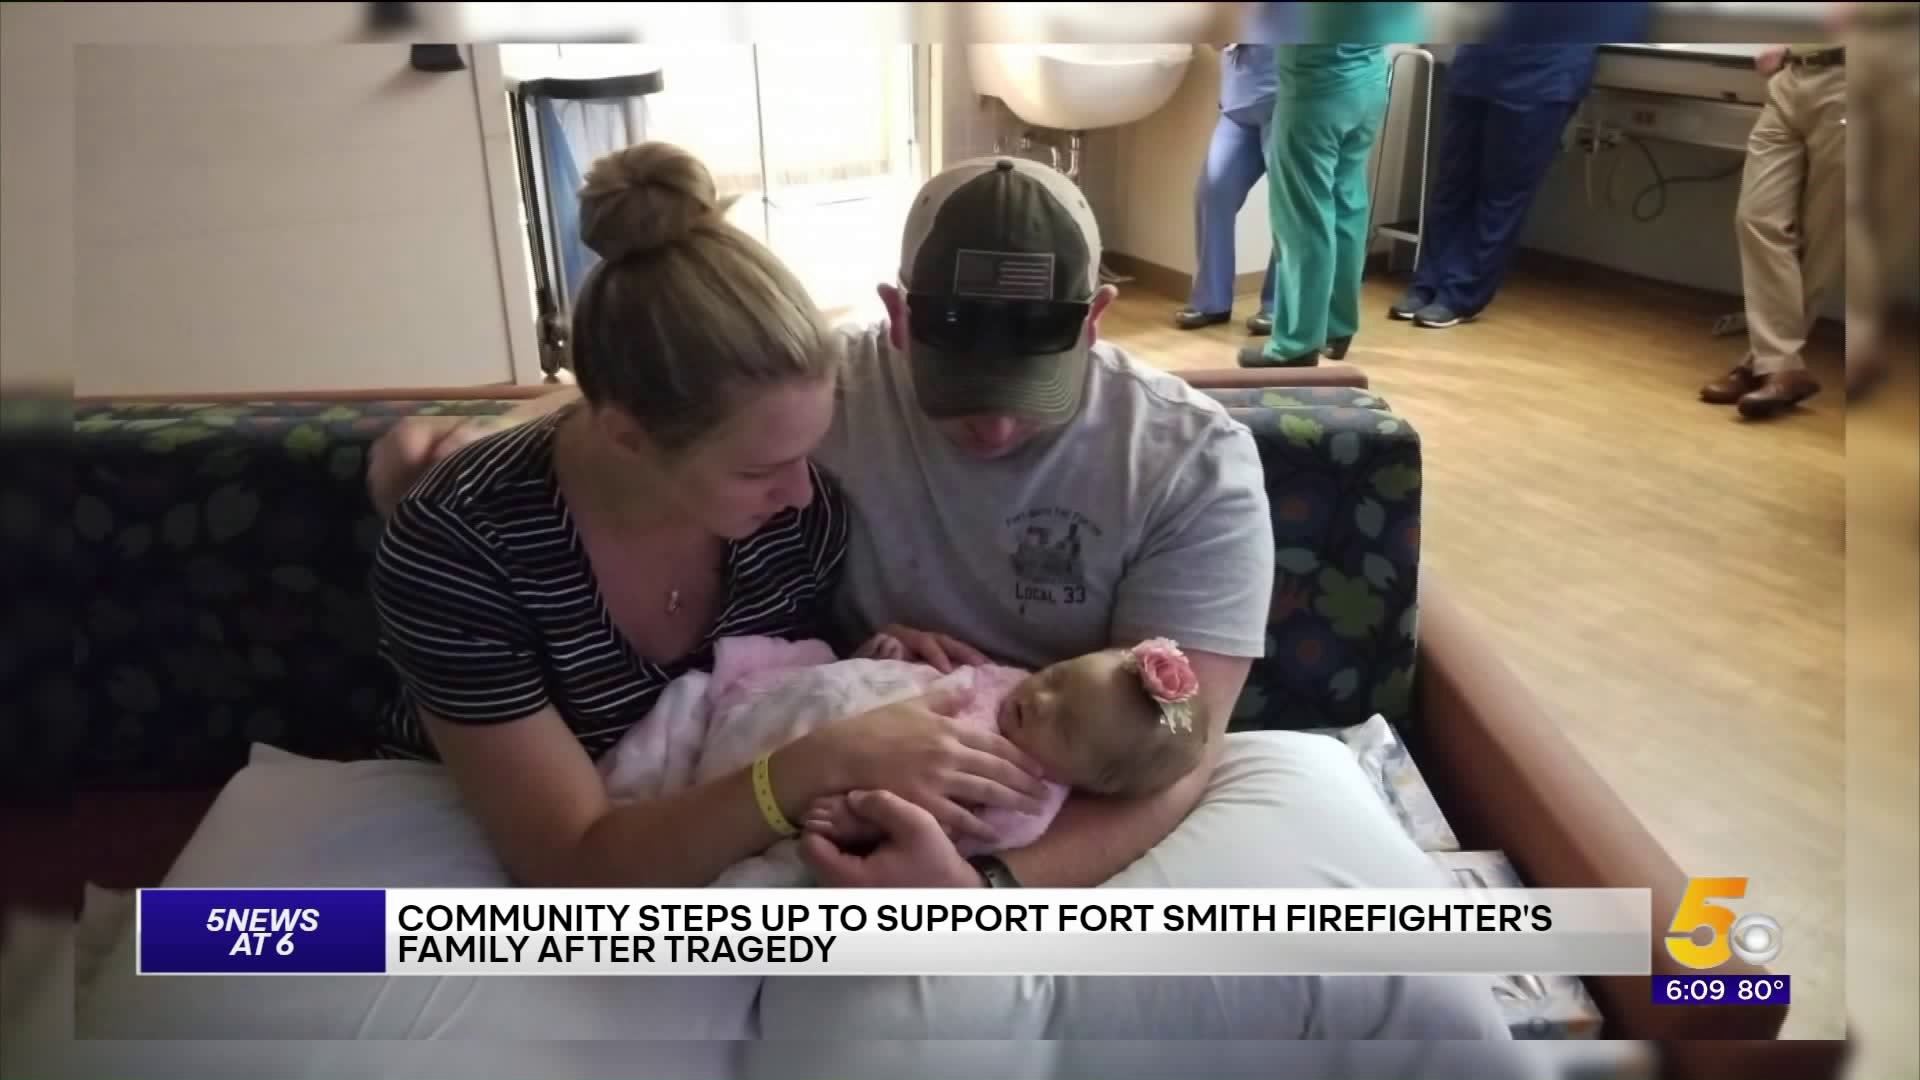 Community Comes Together To Help Family of Firefighter After Tragedy